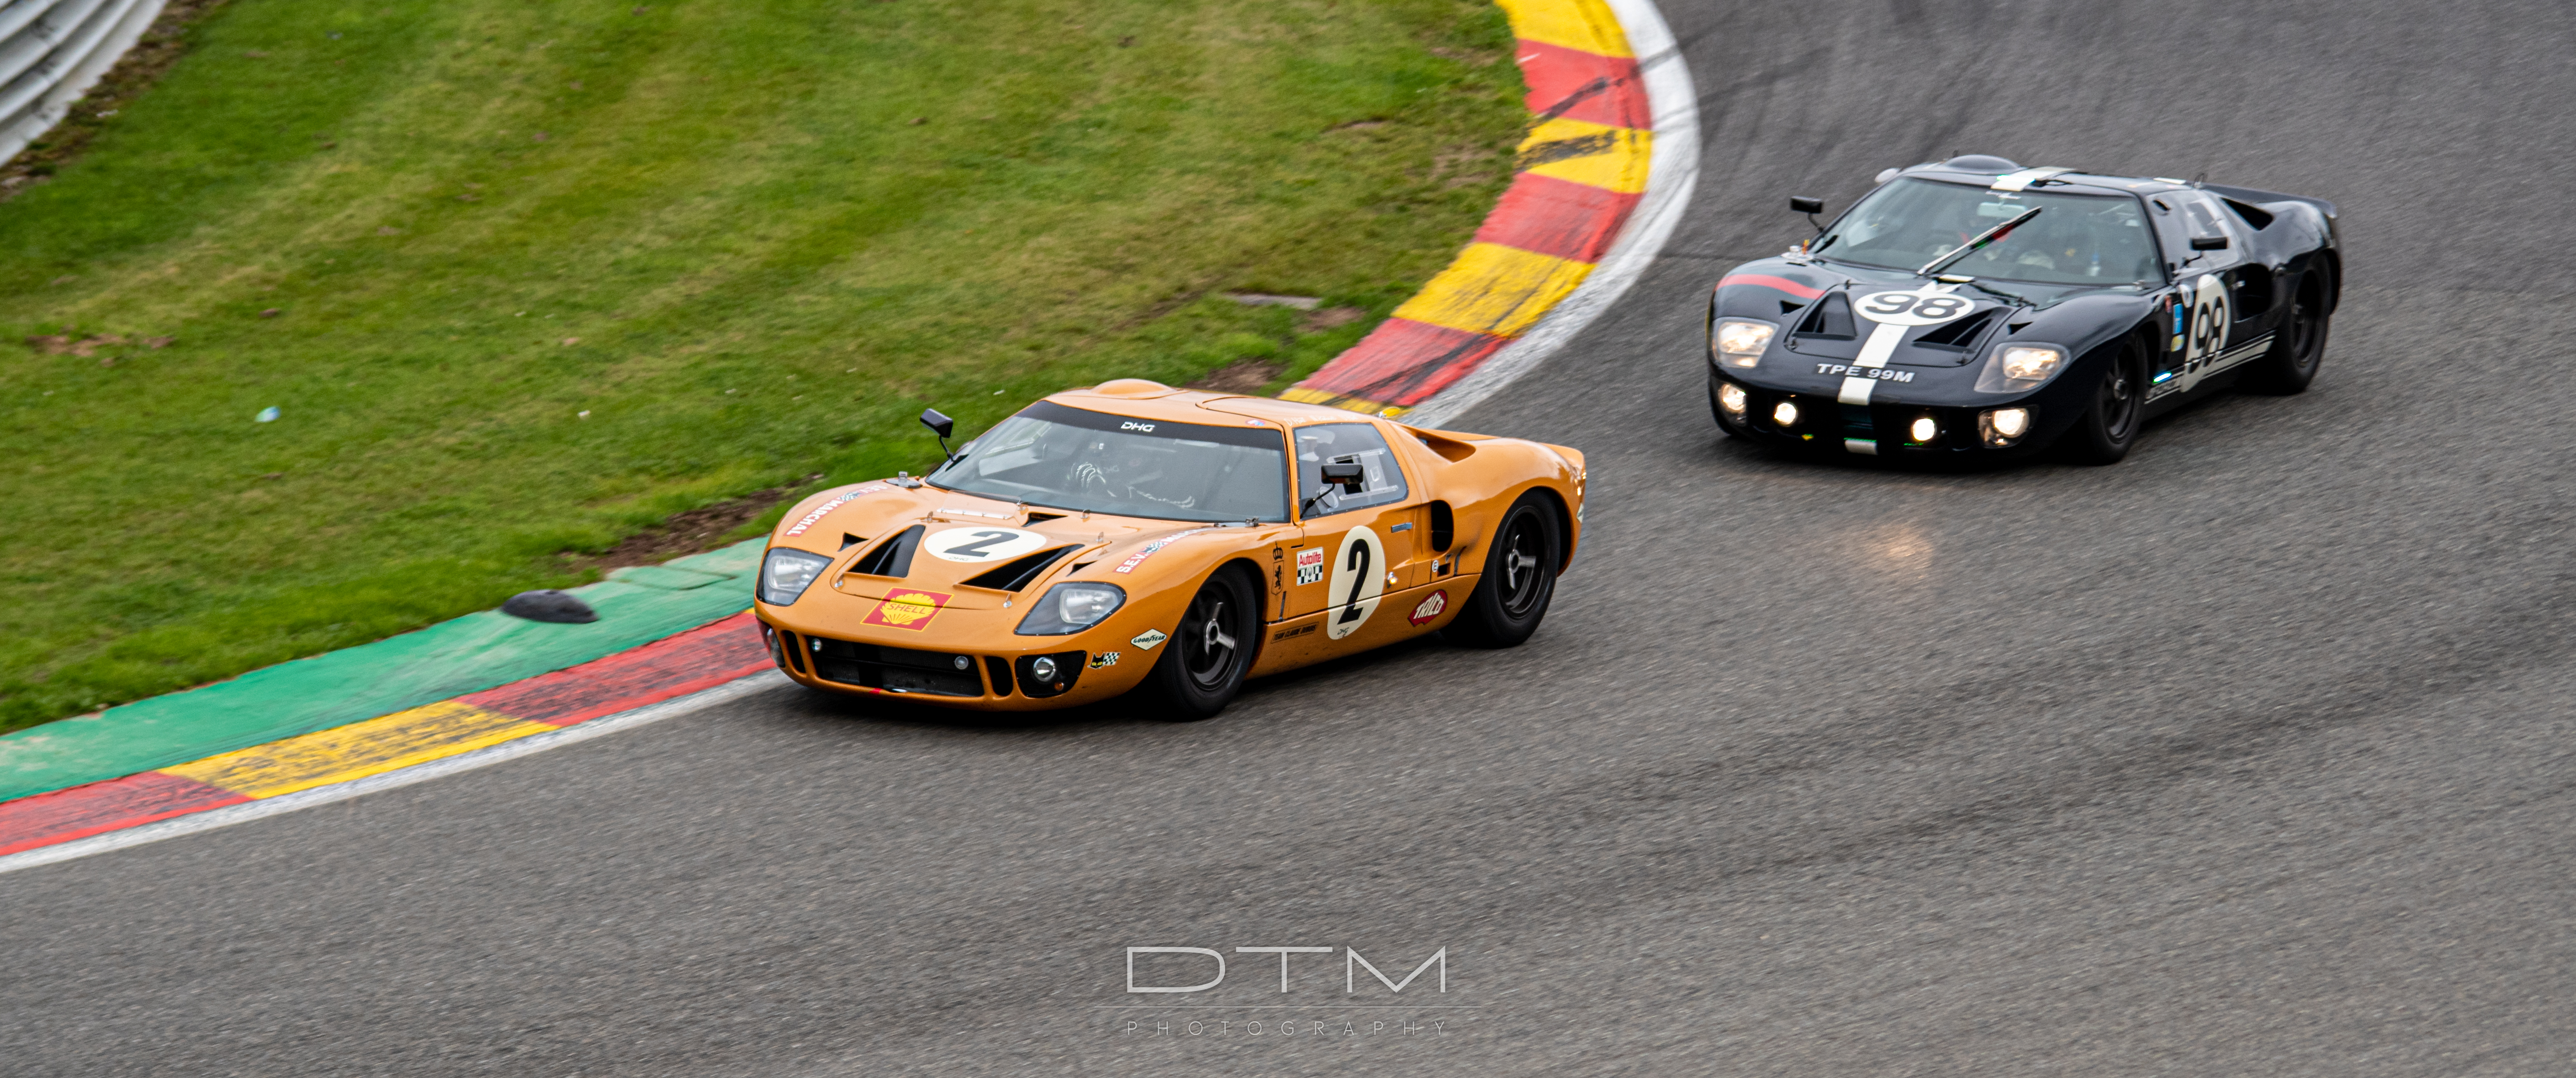 General 5568x2331 Ford GT40 Spa-Francorchamps dtm photography race cars car race tracks grass frontal view American cars Ford